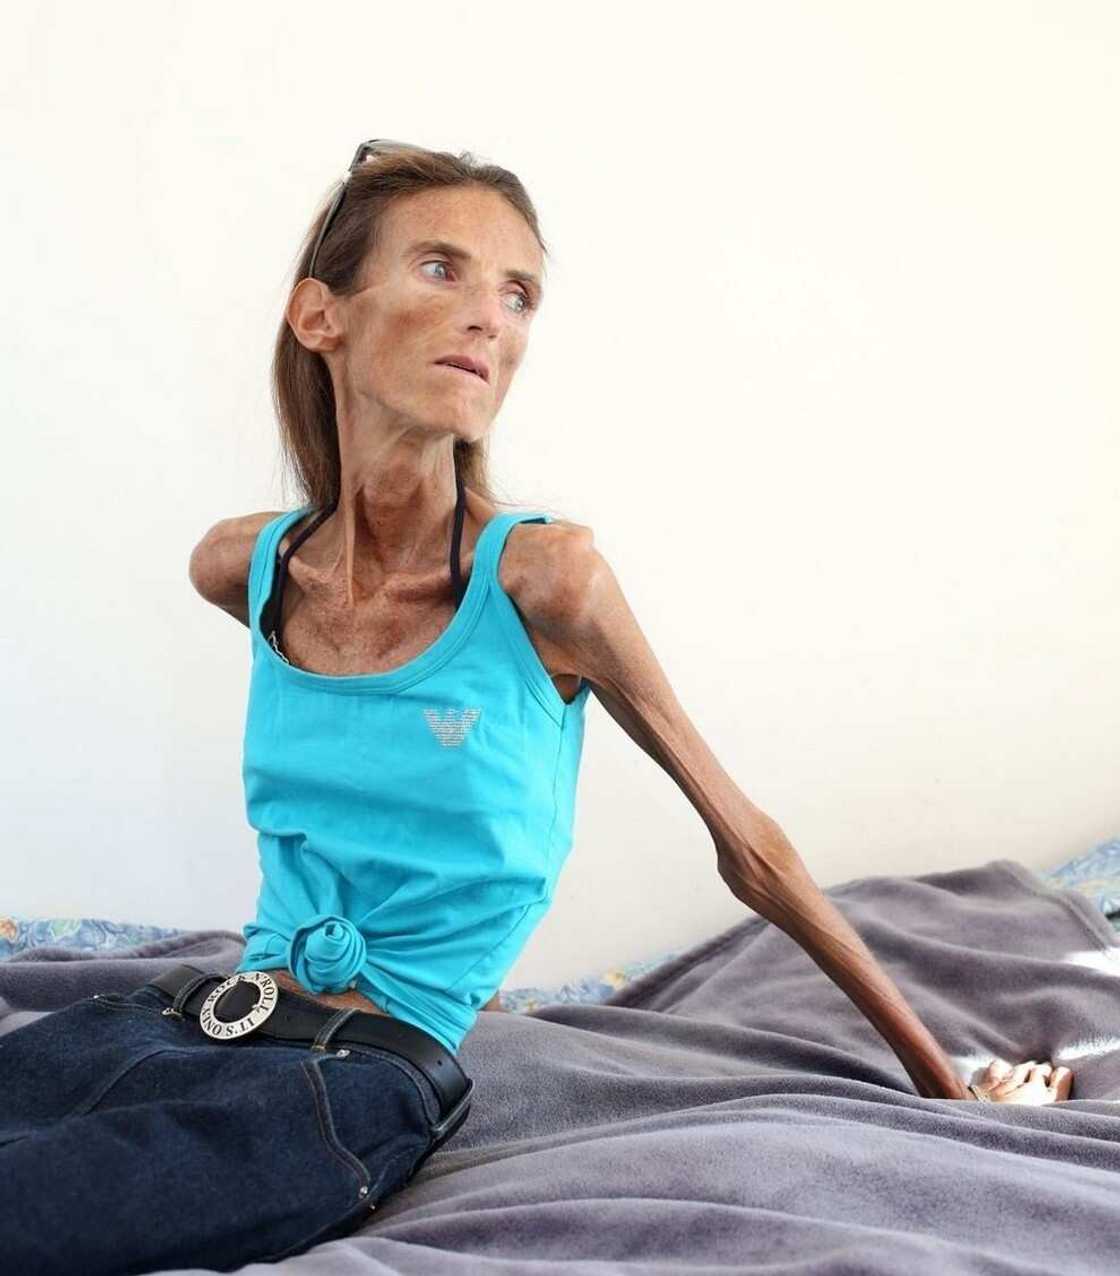 The thinnest woman in the world